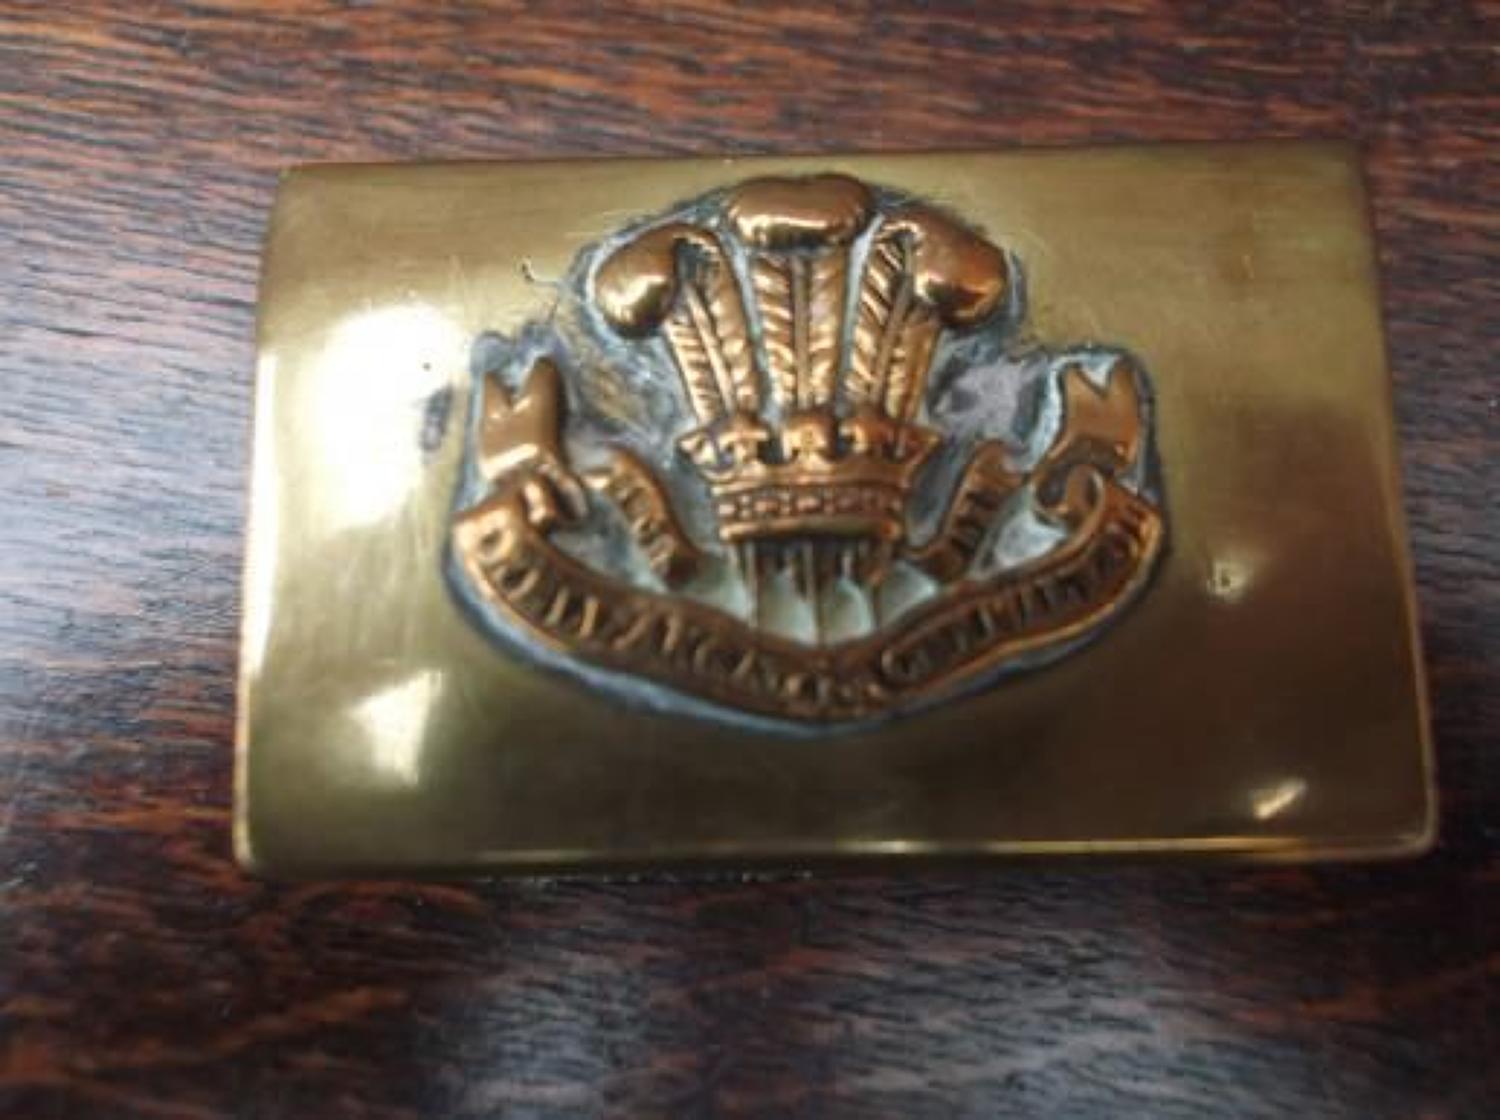 WW1 Trench Art Brass Matchbox cover of the Welsh Regiment.